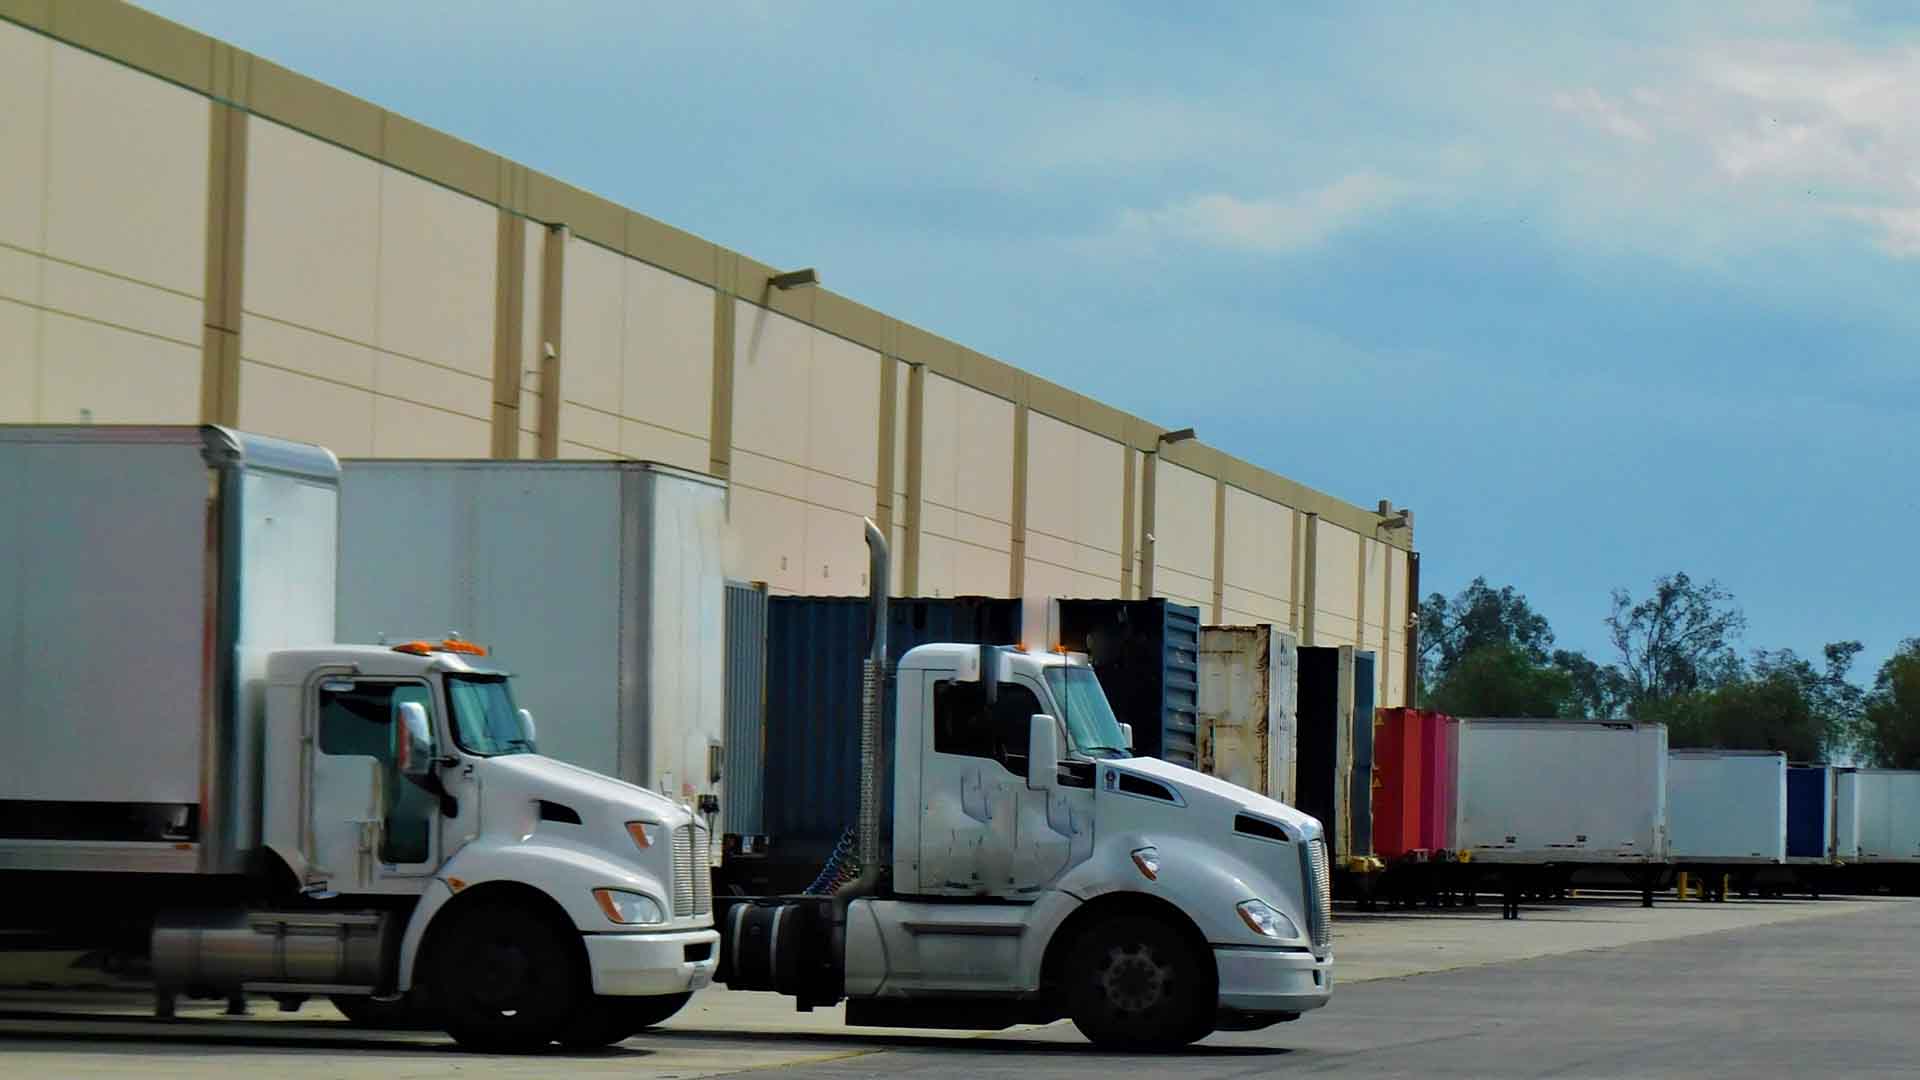 Photo of a freight truck unloading at a warehouse